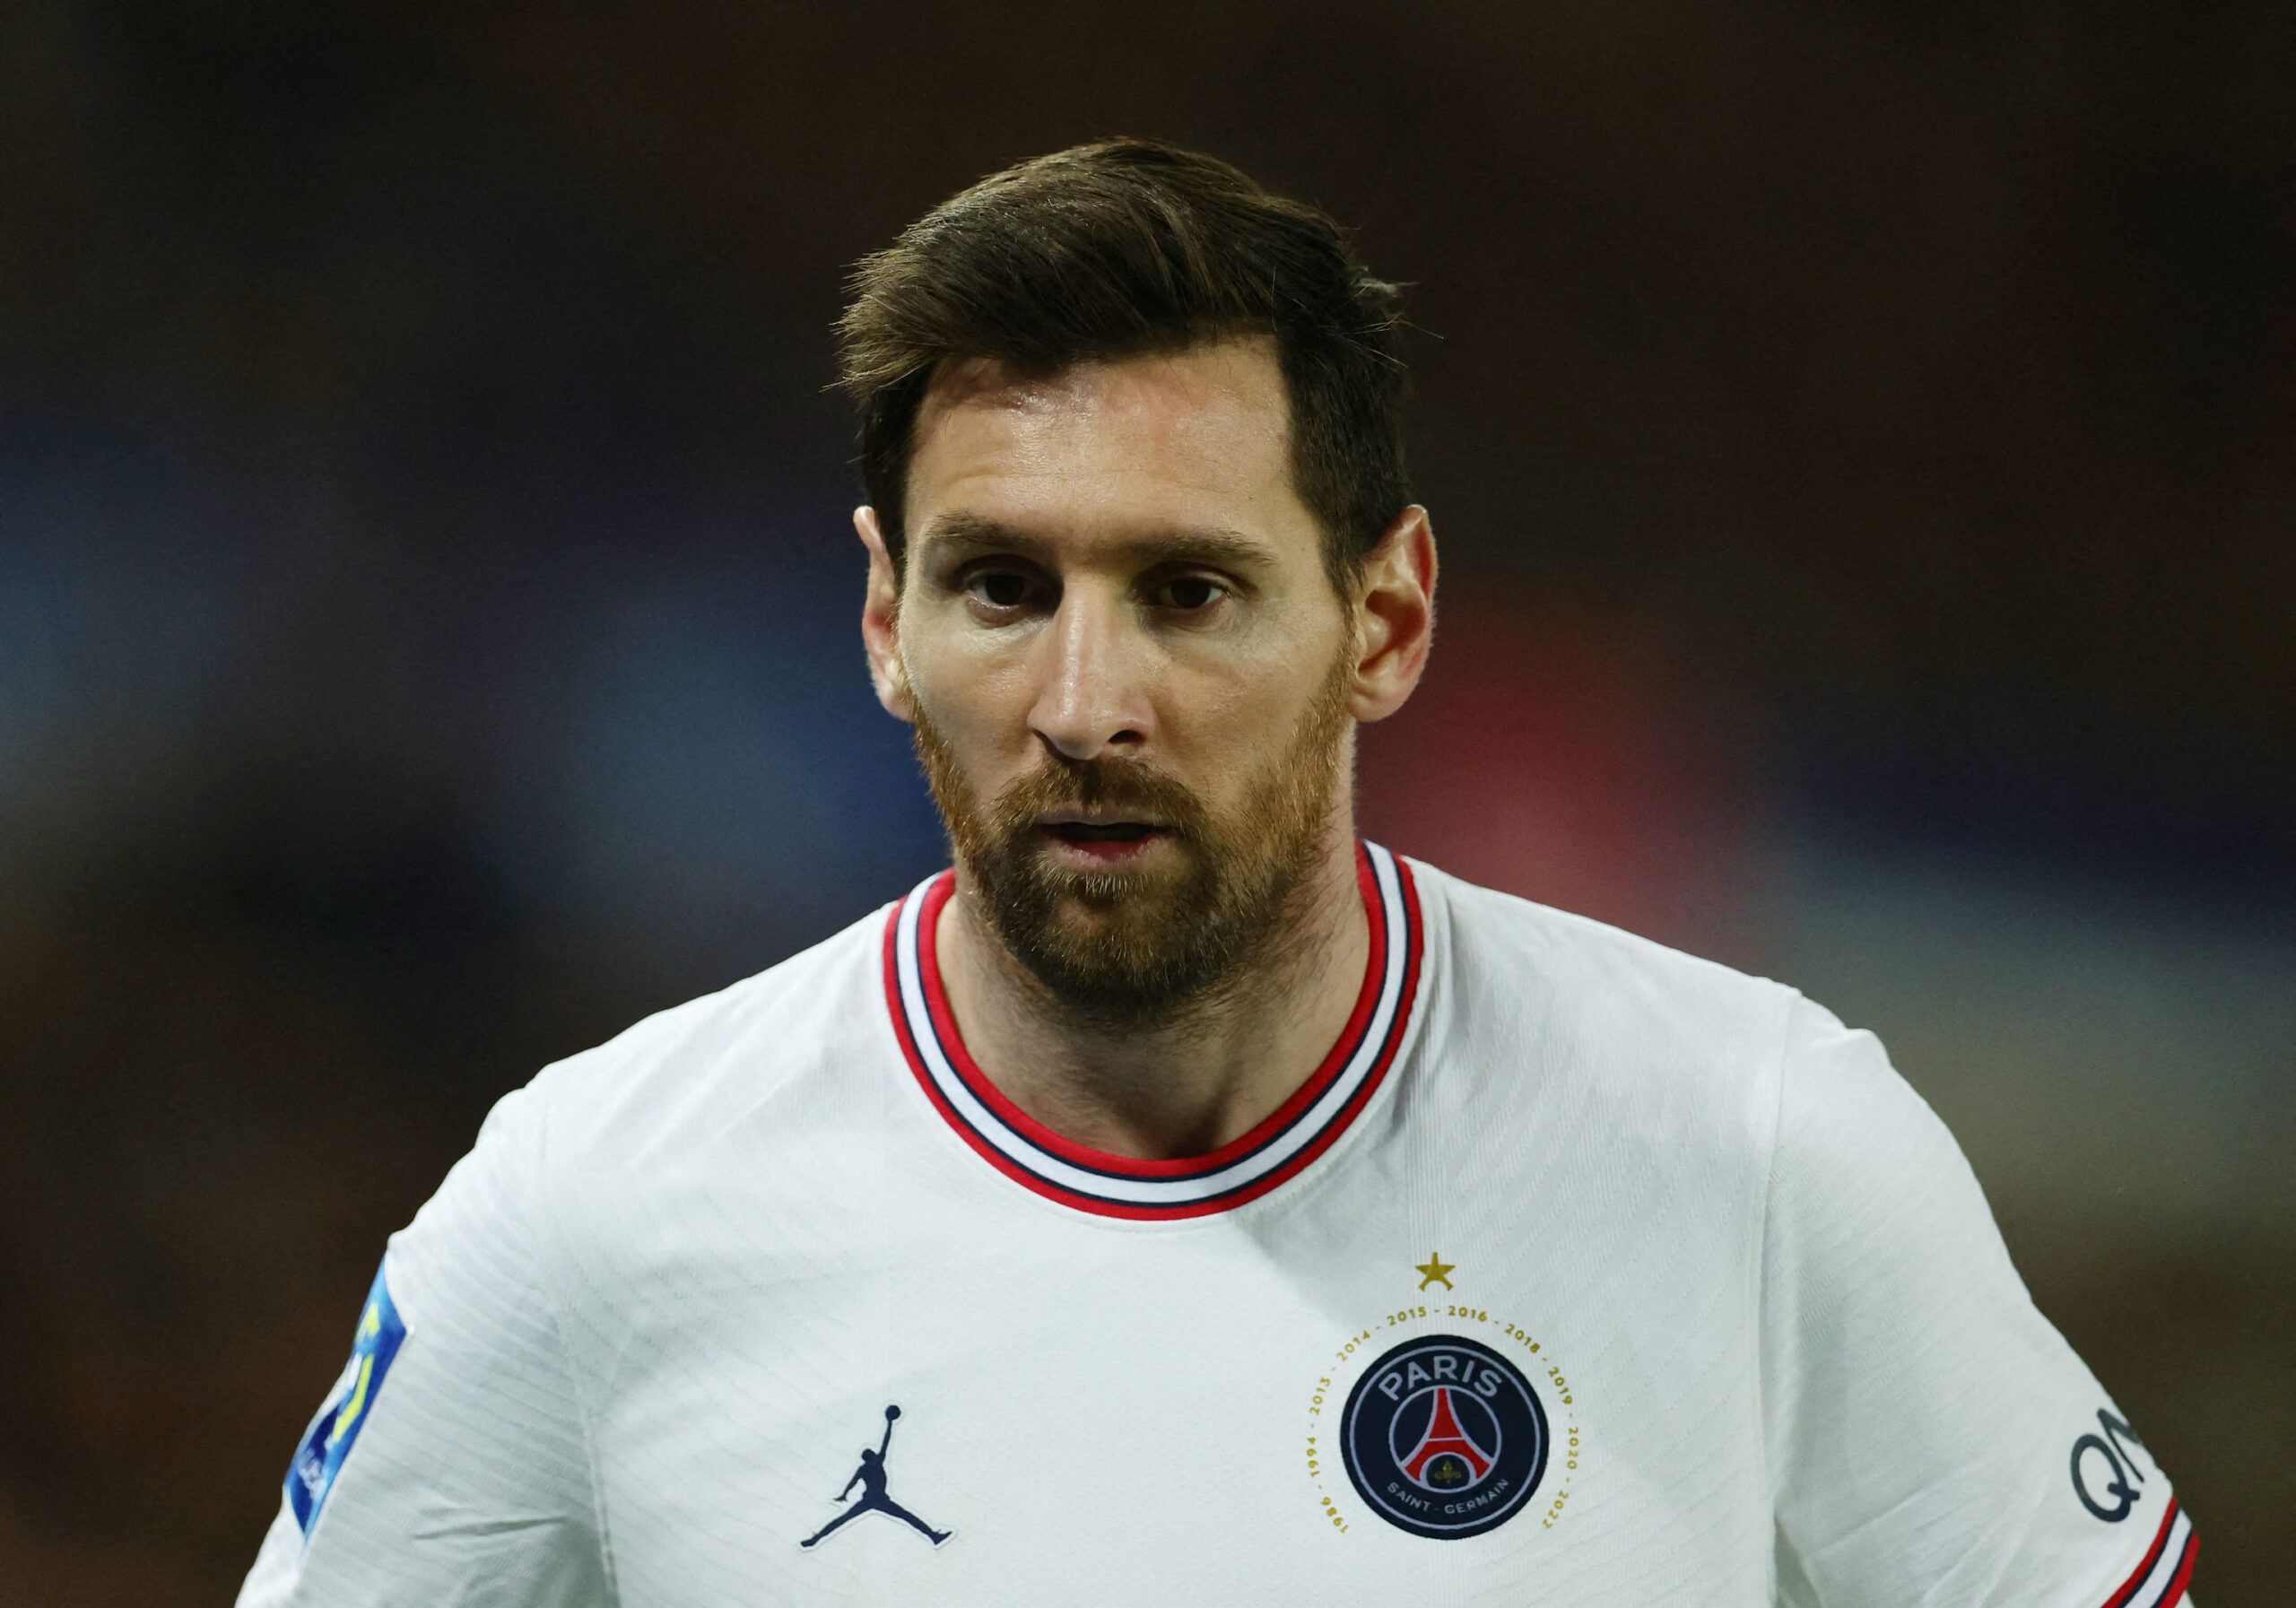 Lionel Messi Why does PSG's new kit have 'GOAT' written on it?